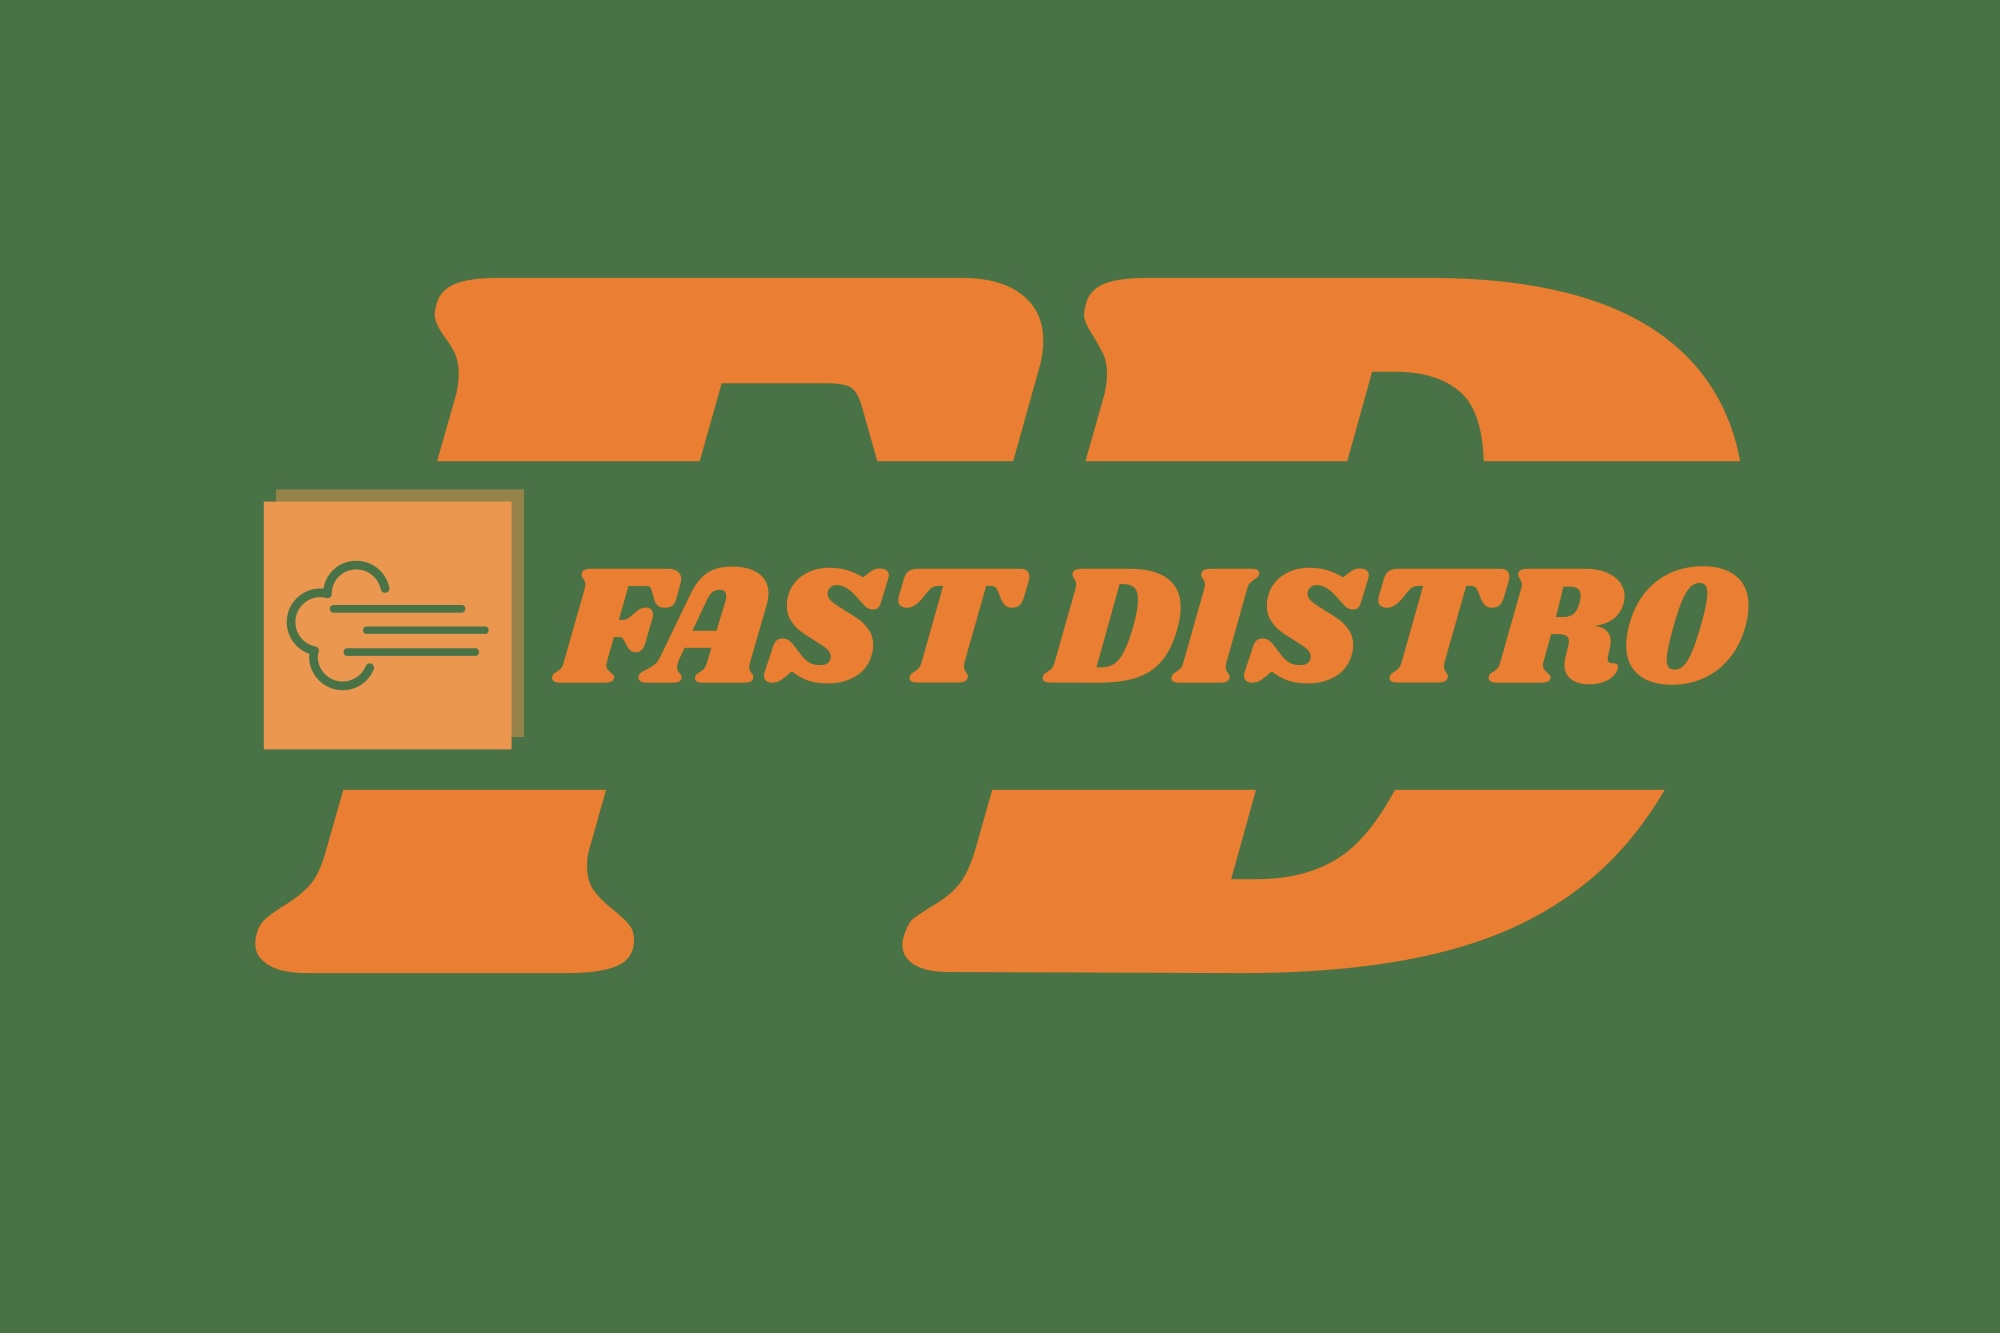 Logo of Fast Distro Ltd Courier And Messenger Services In Stoke On Trent, Staffordshire